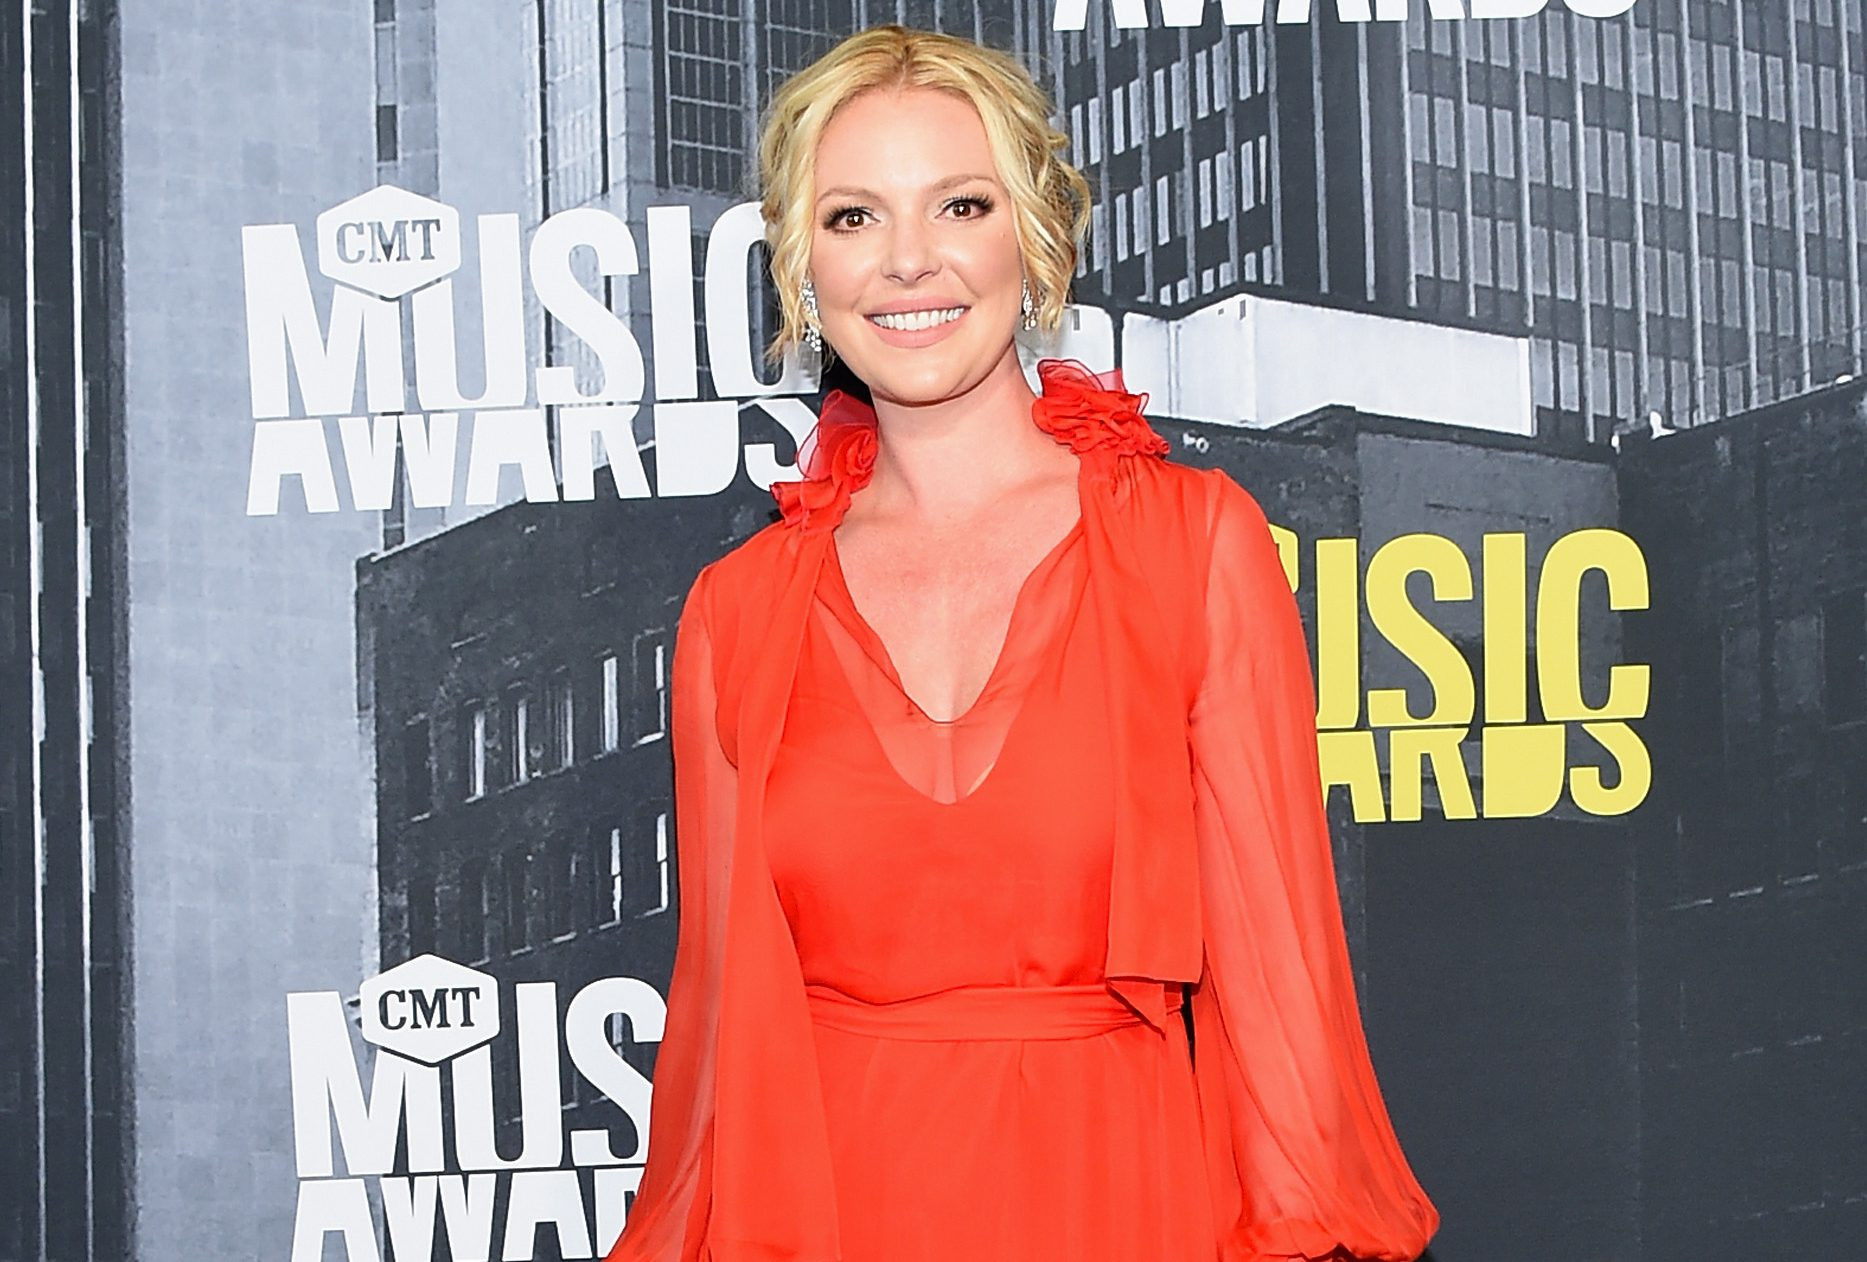 Katherine Heigl hits back at being labelled ‘difficult’ in Hollywood: ‘I felt like I would rather be dead’